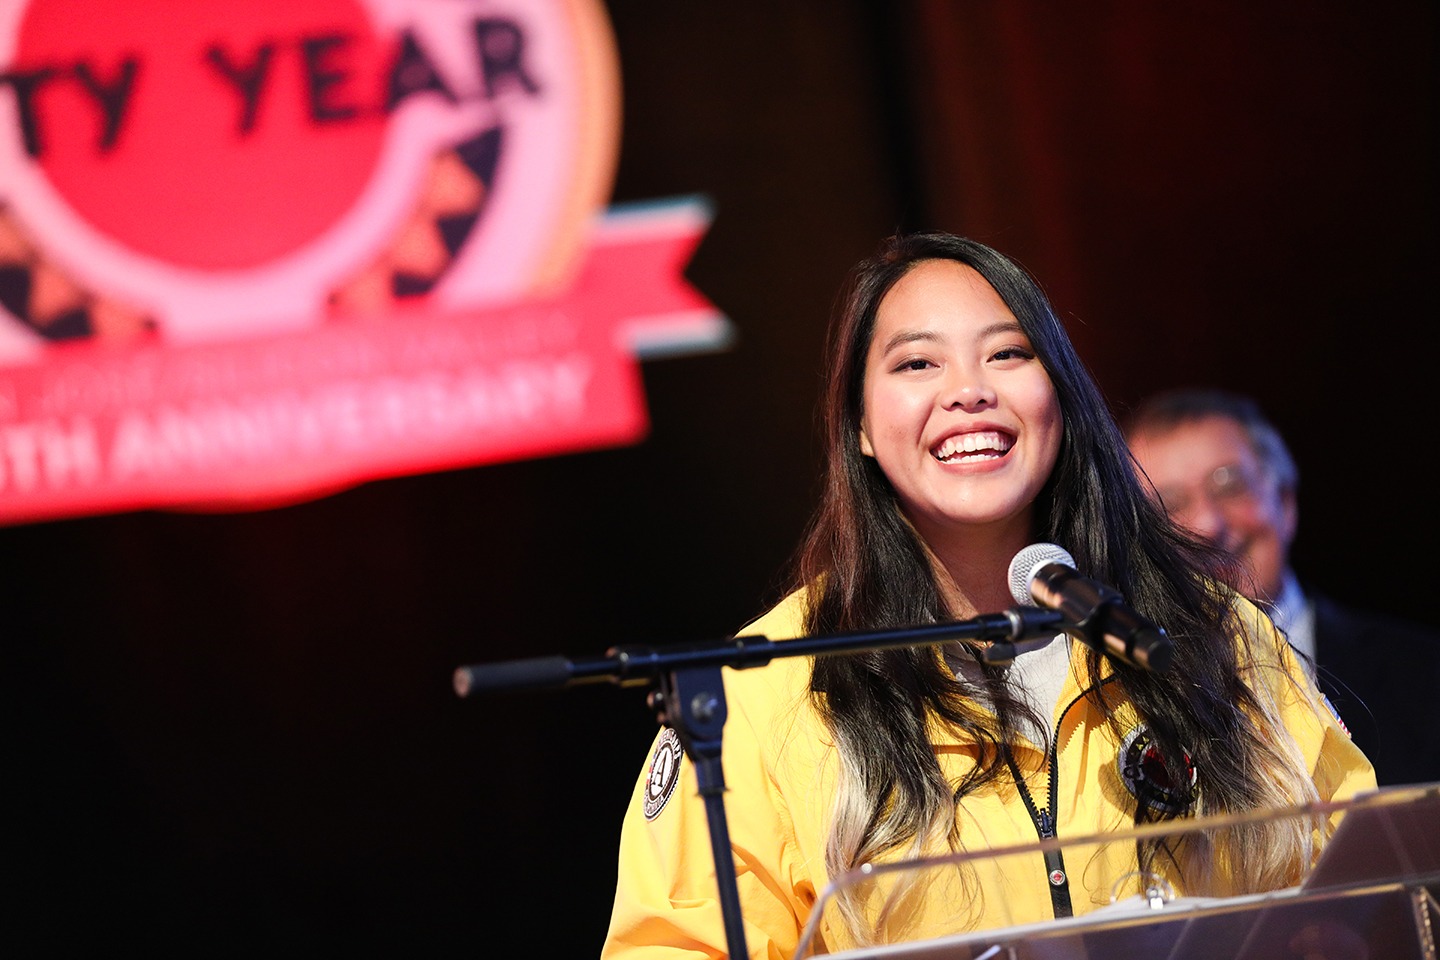 An AmeriCorps member speaks at a City Year event